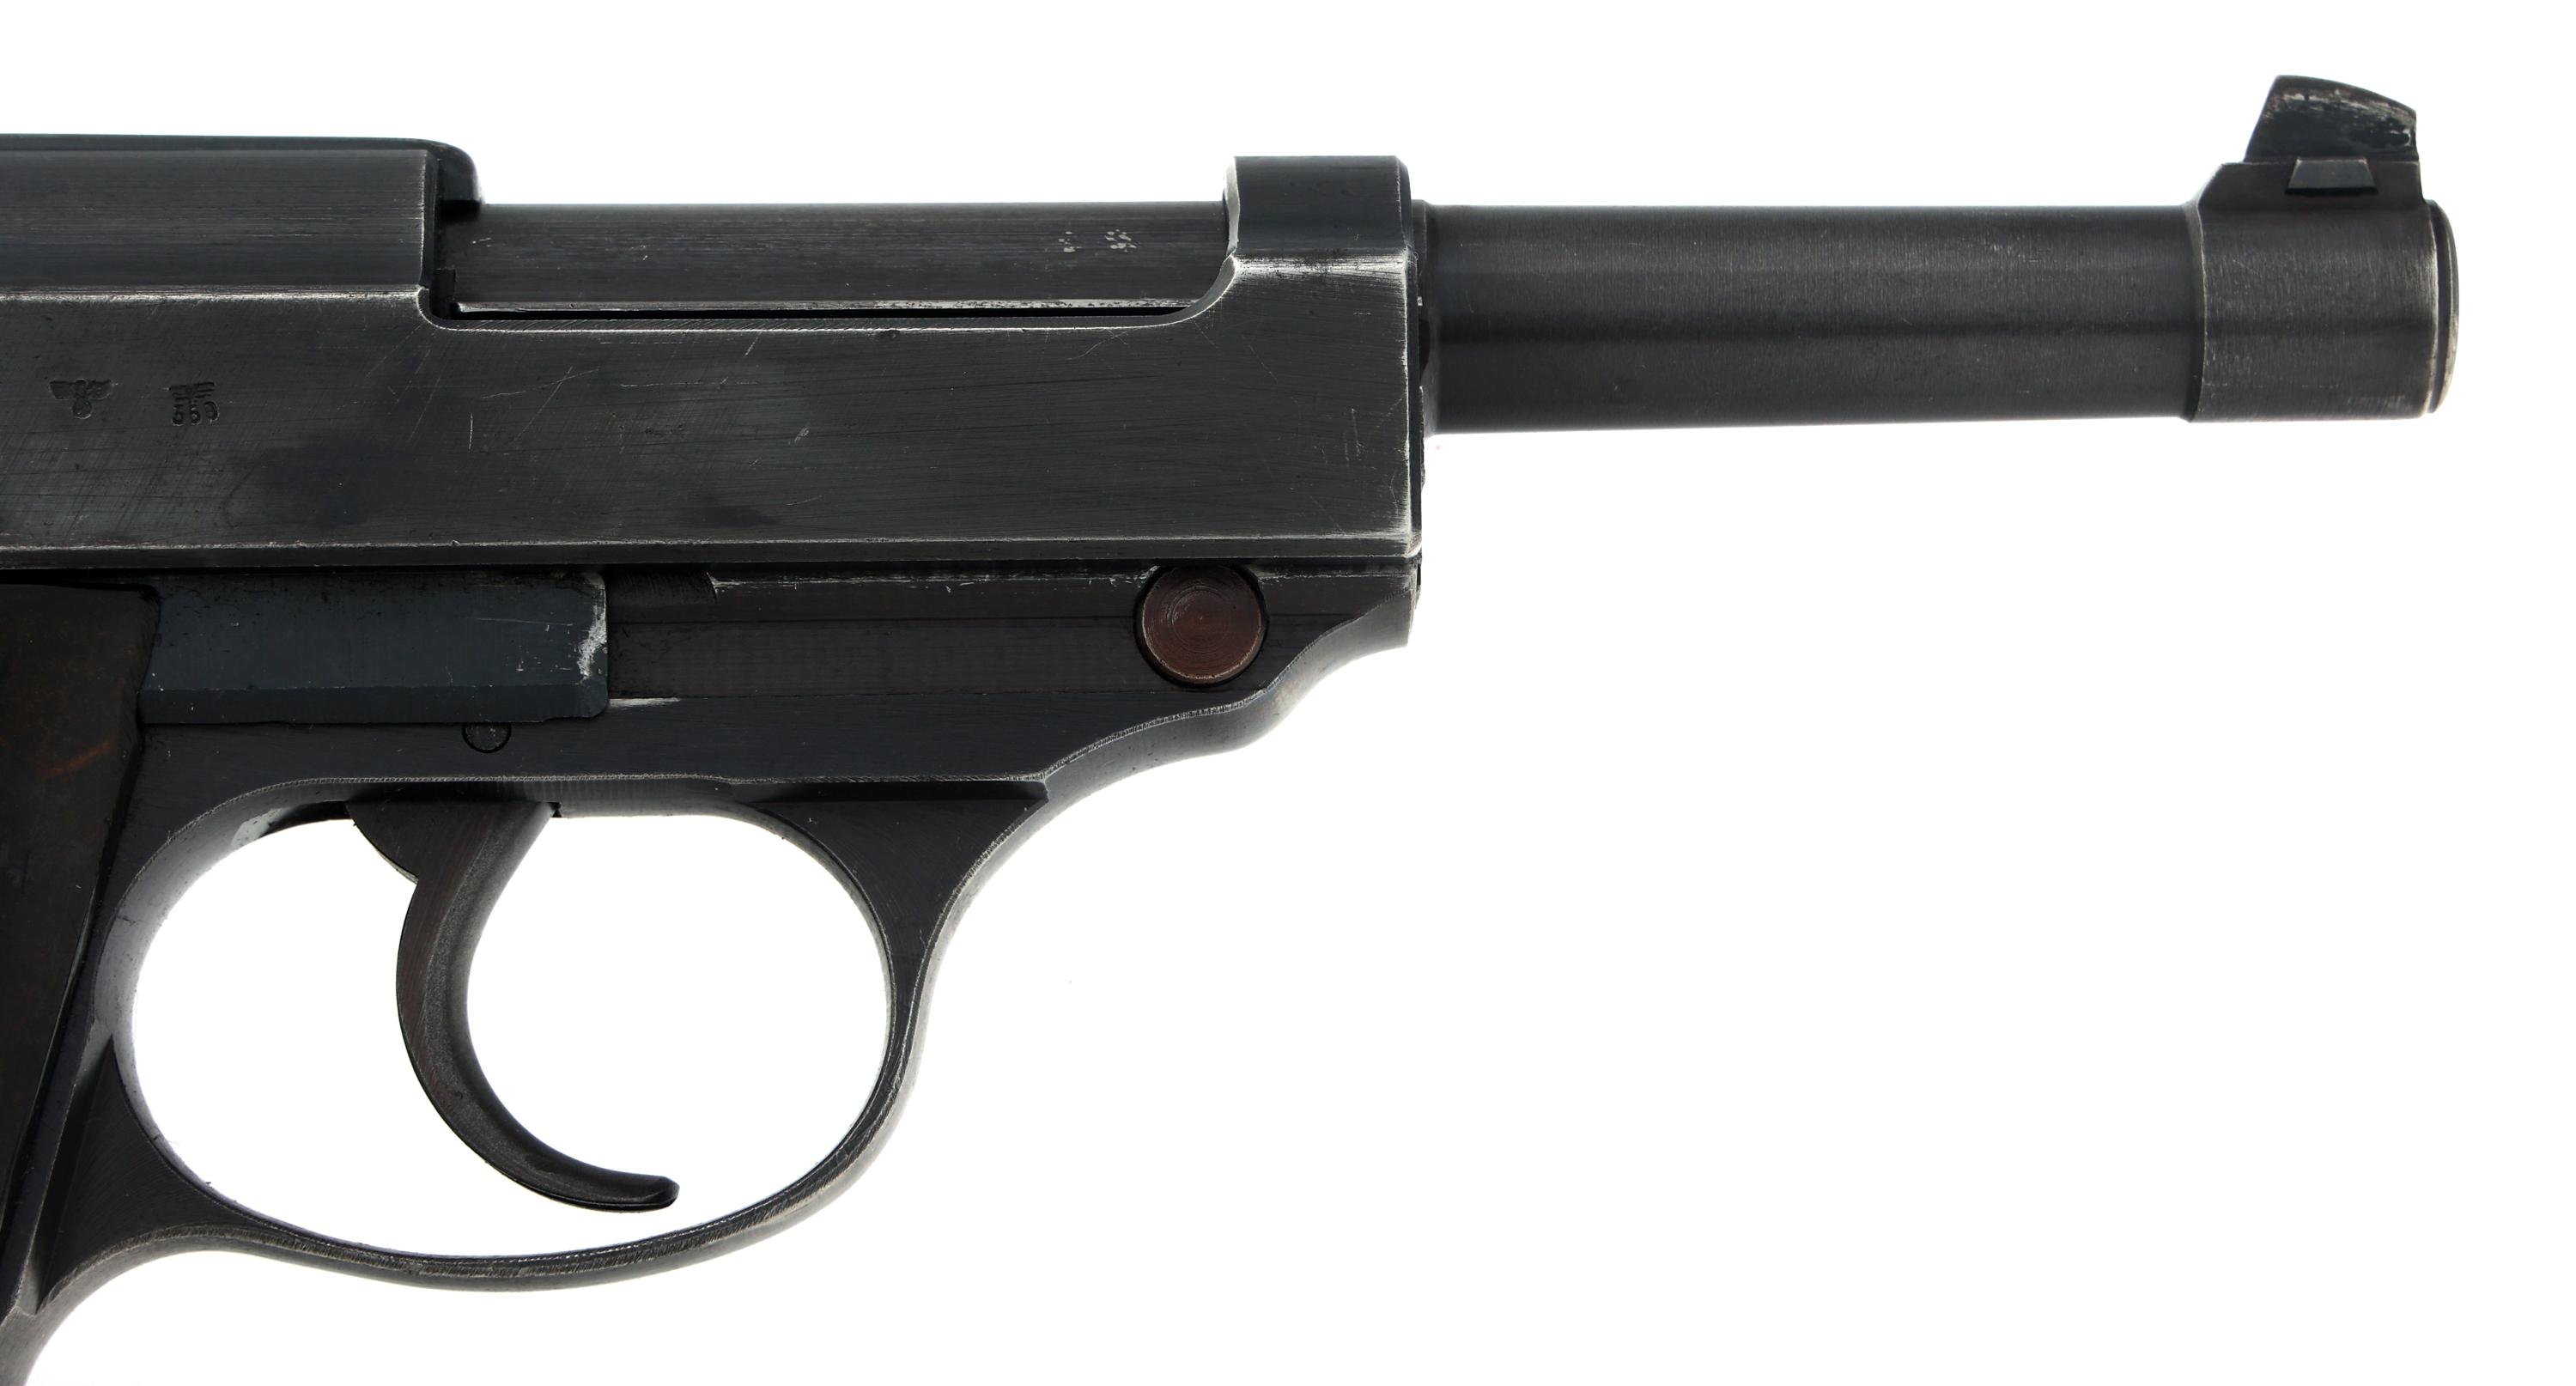 WWII GERMAN ac CODE WALTHER MODEL P38 9mm PISTOL